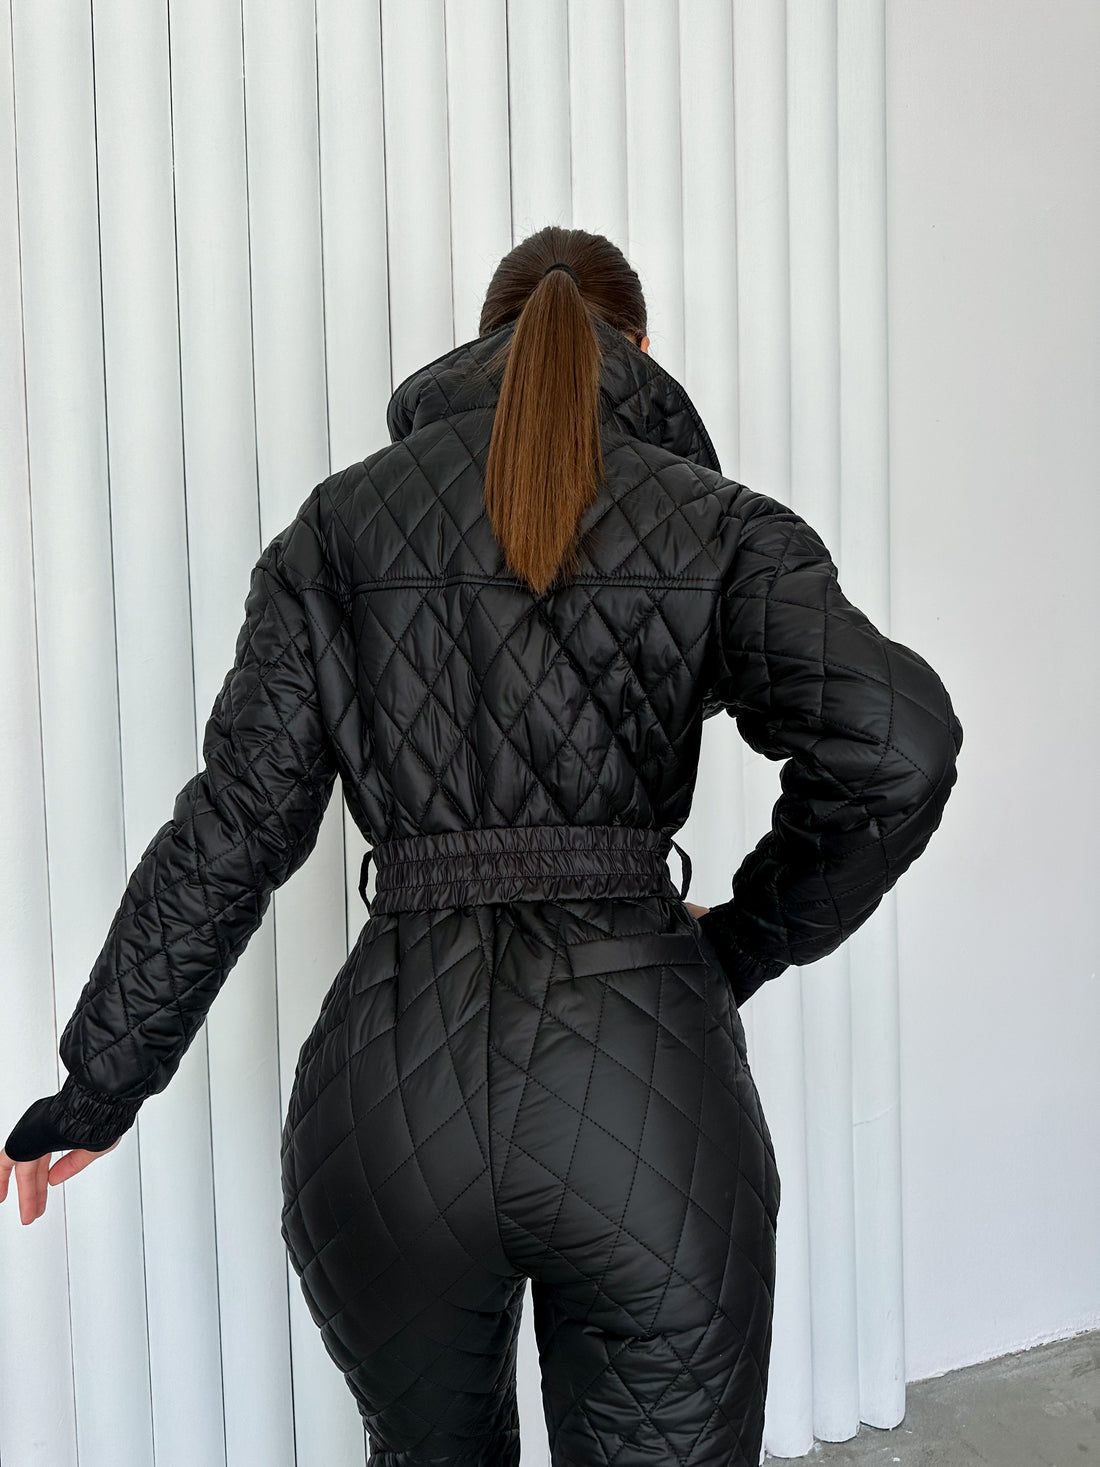 Black ski suit quilted warm jumpsuit for winter LUCANIA - BLACK Ladies ski clothing warm for winter sport